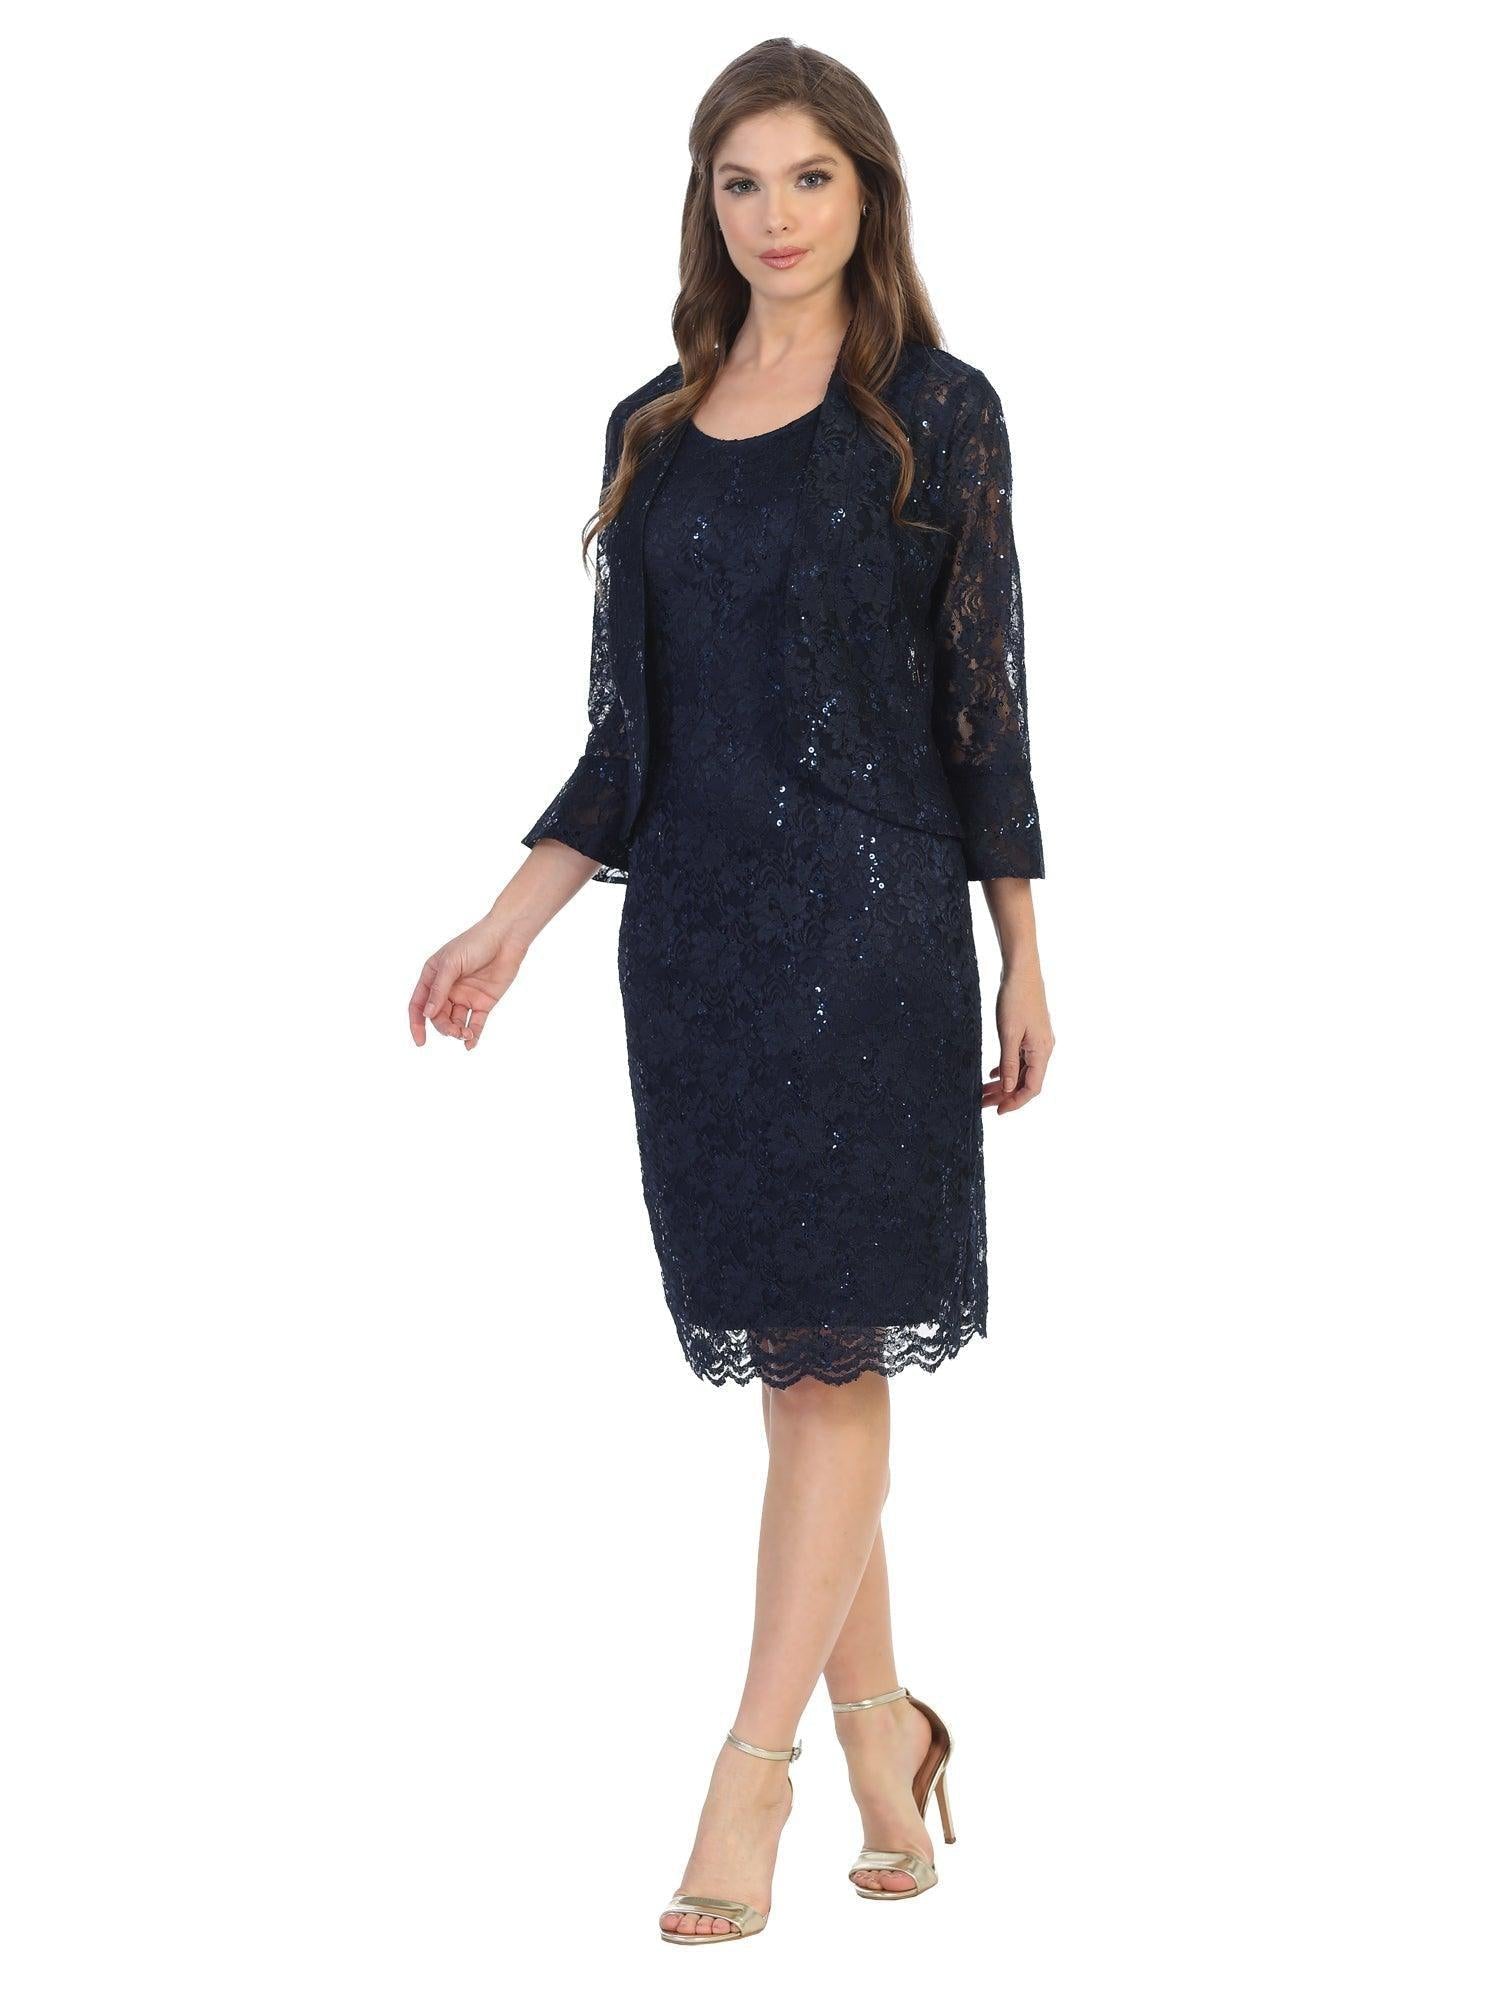 Short Mother of the Bride 2 Piece Lace Jacket Dress - The Dress Outlet